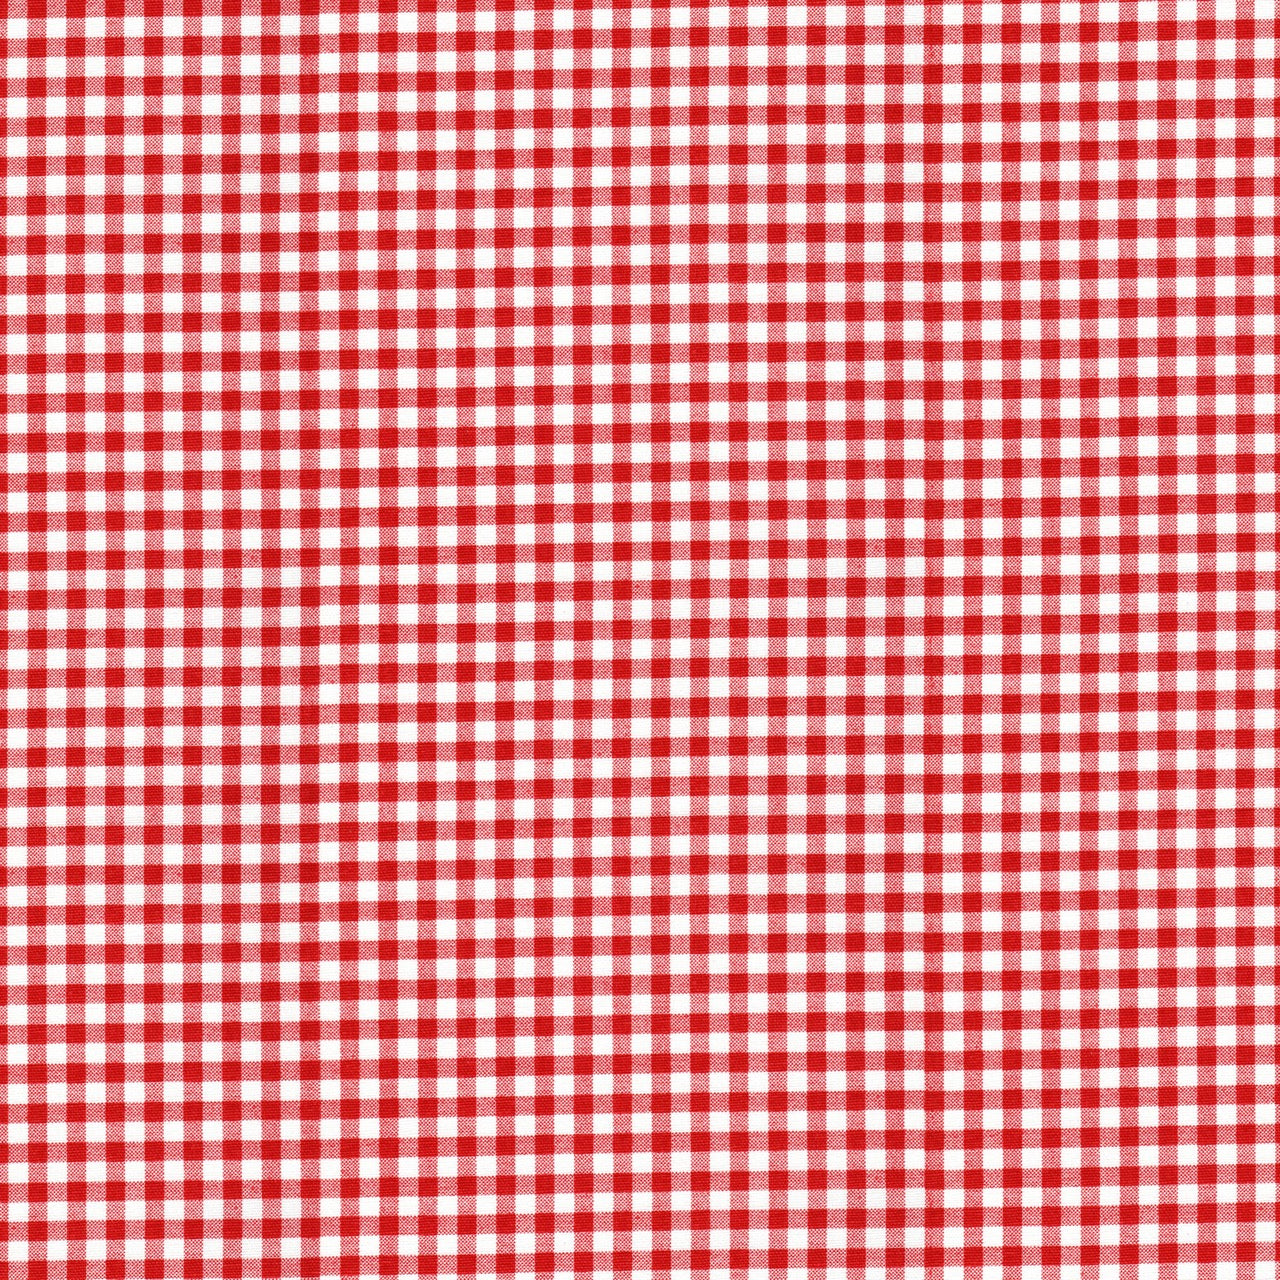 Bed Runner in Lipstick Red Large Gingham Check on White